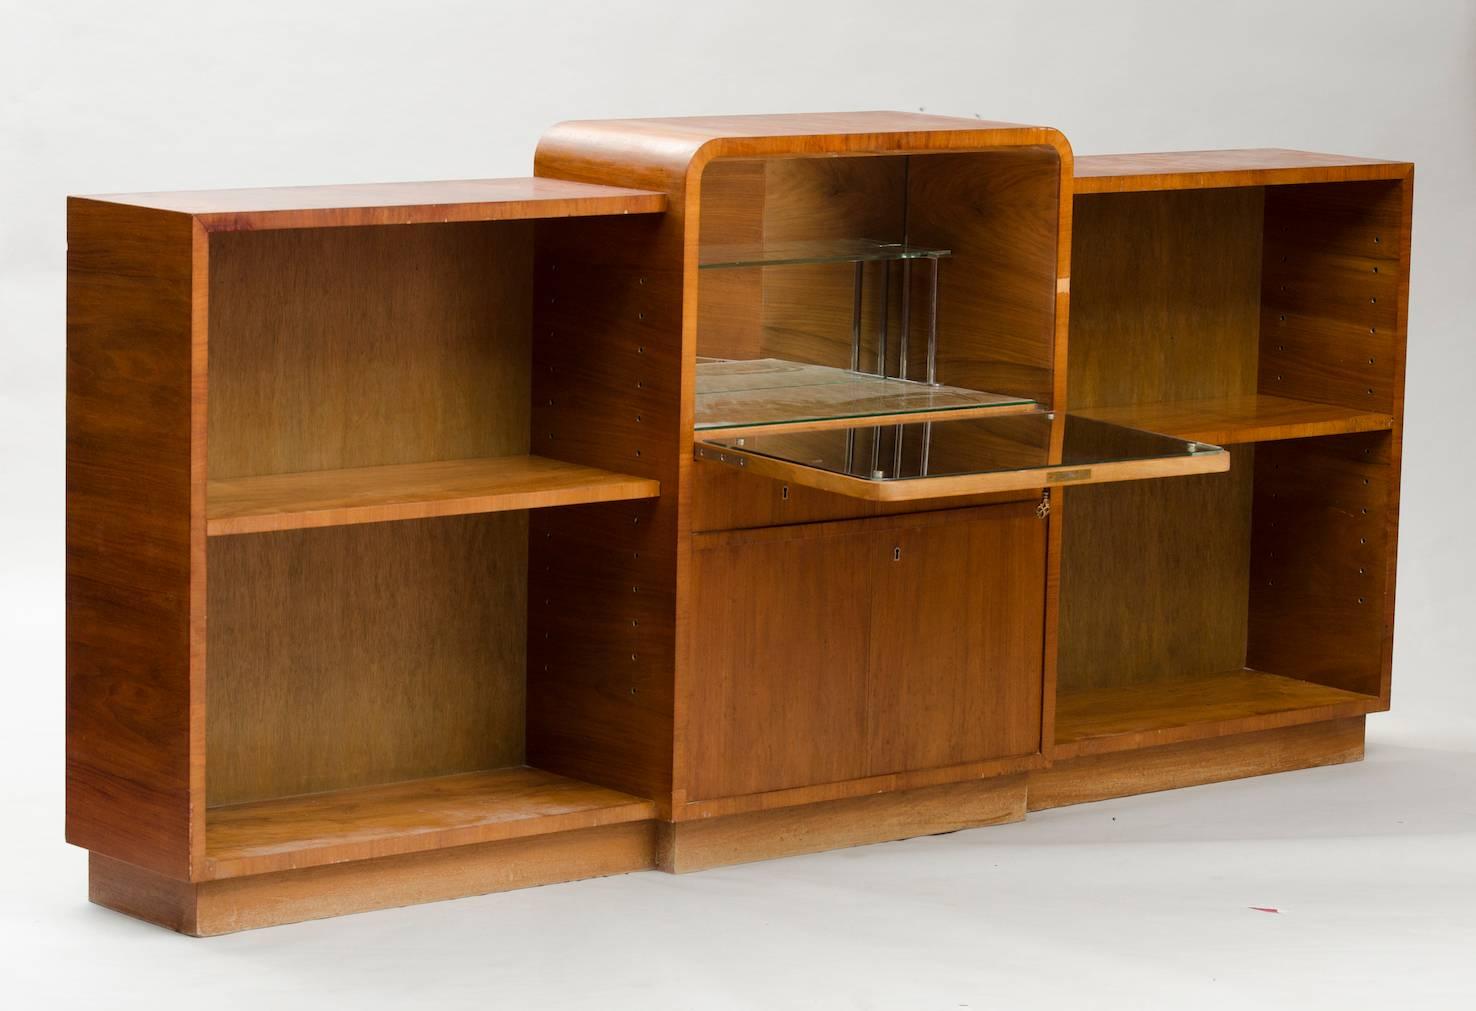 Walnut bookshelf with a central dry bar, inlaid figures in the door.
Price fully restored: 2775€
Producer: Garsnas Mobler
The price shown is in the original condition.
We have our own workshop and we can restore these items, including upholstery